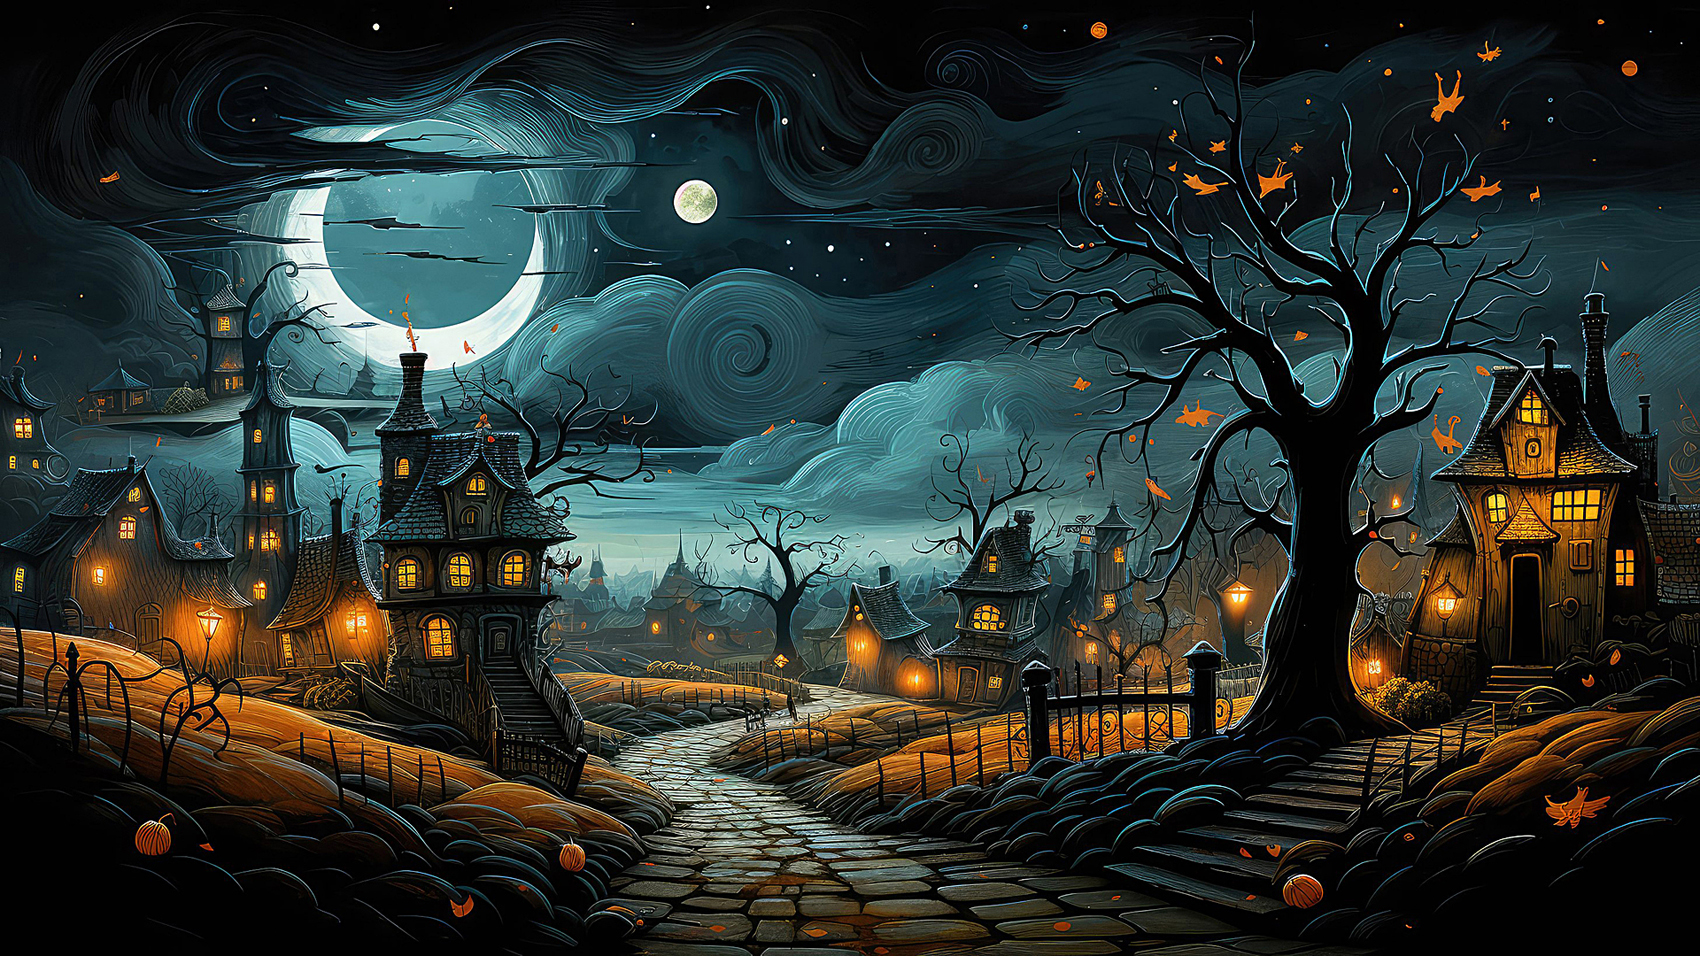 October Town by sed on DeviantArt